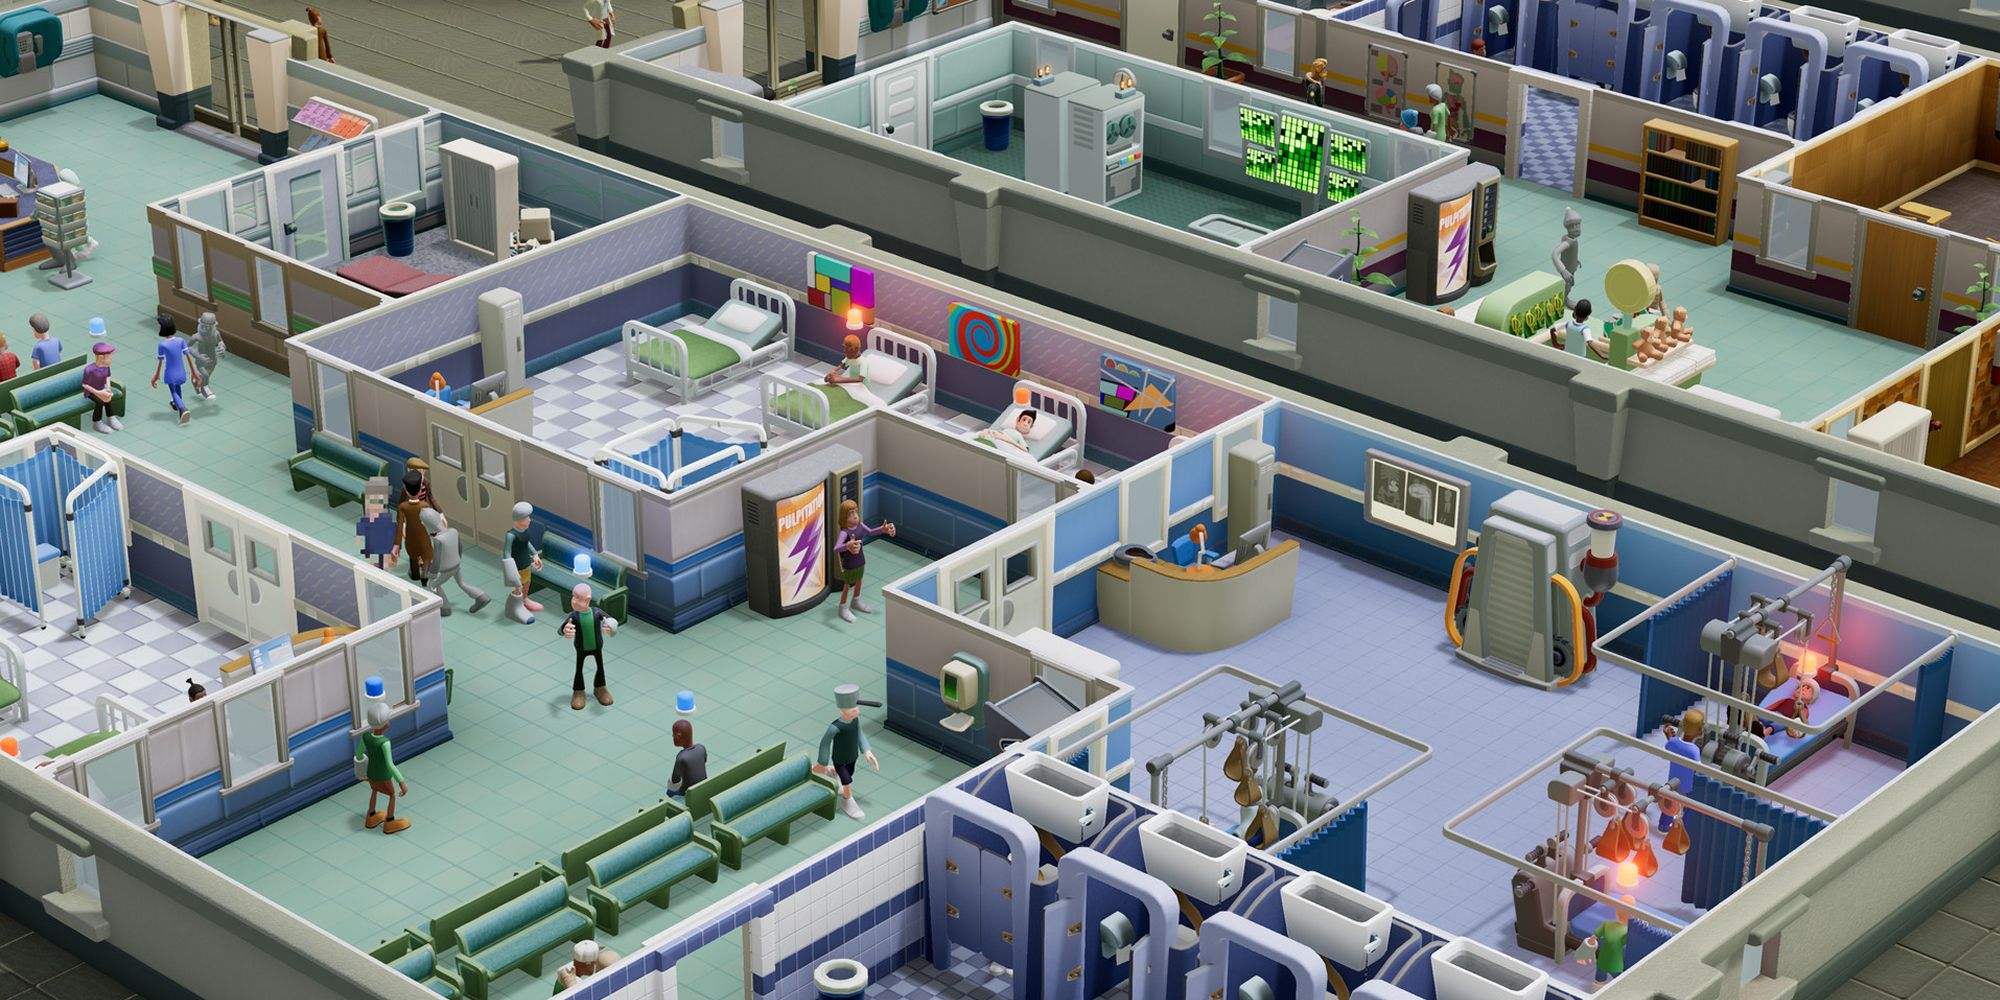 A Two Point Hospital Layout